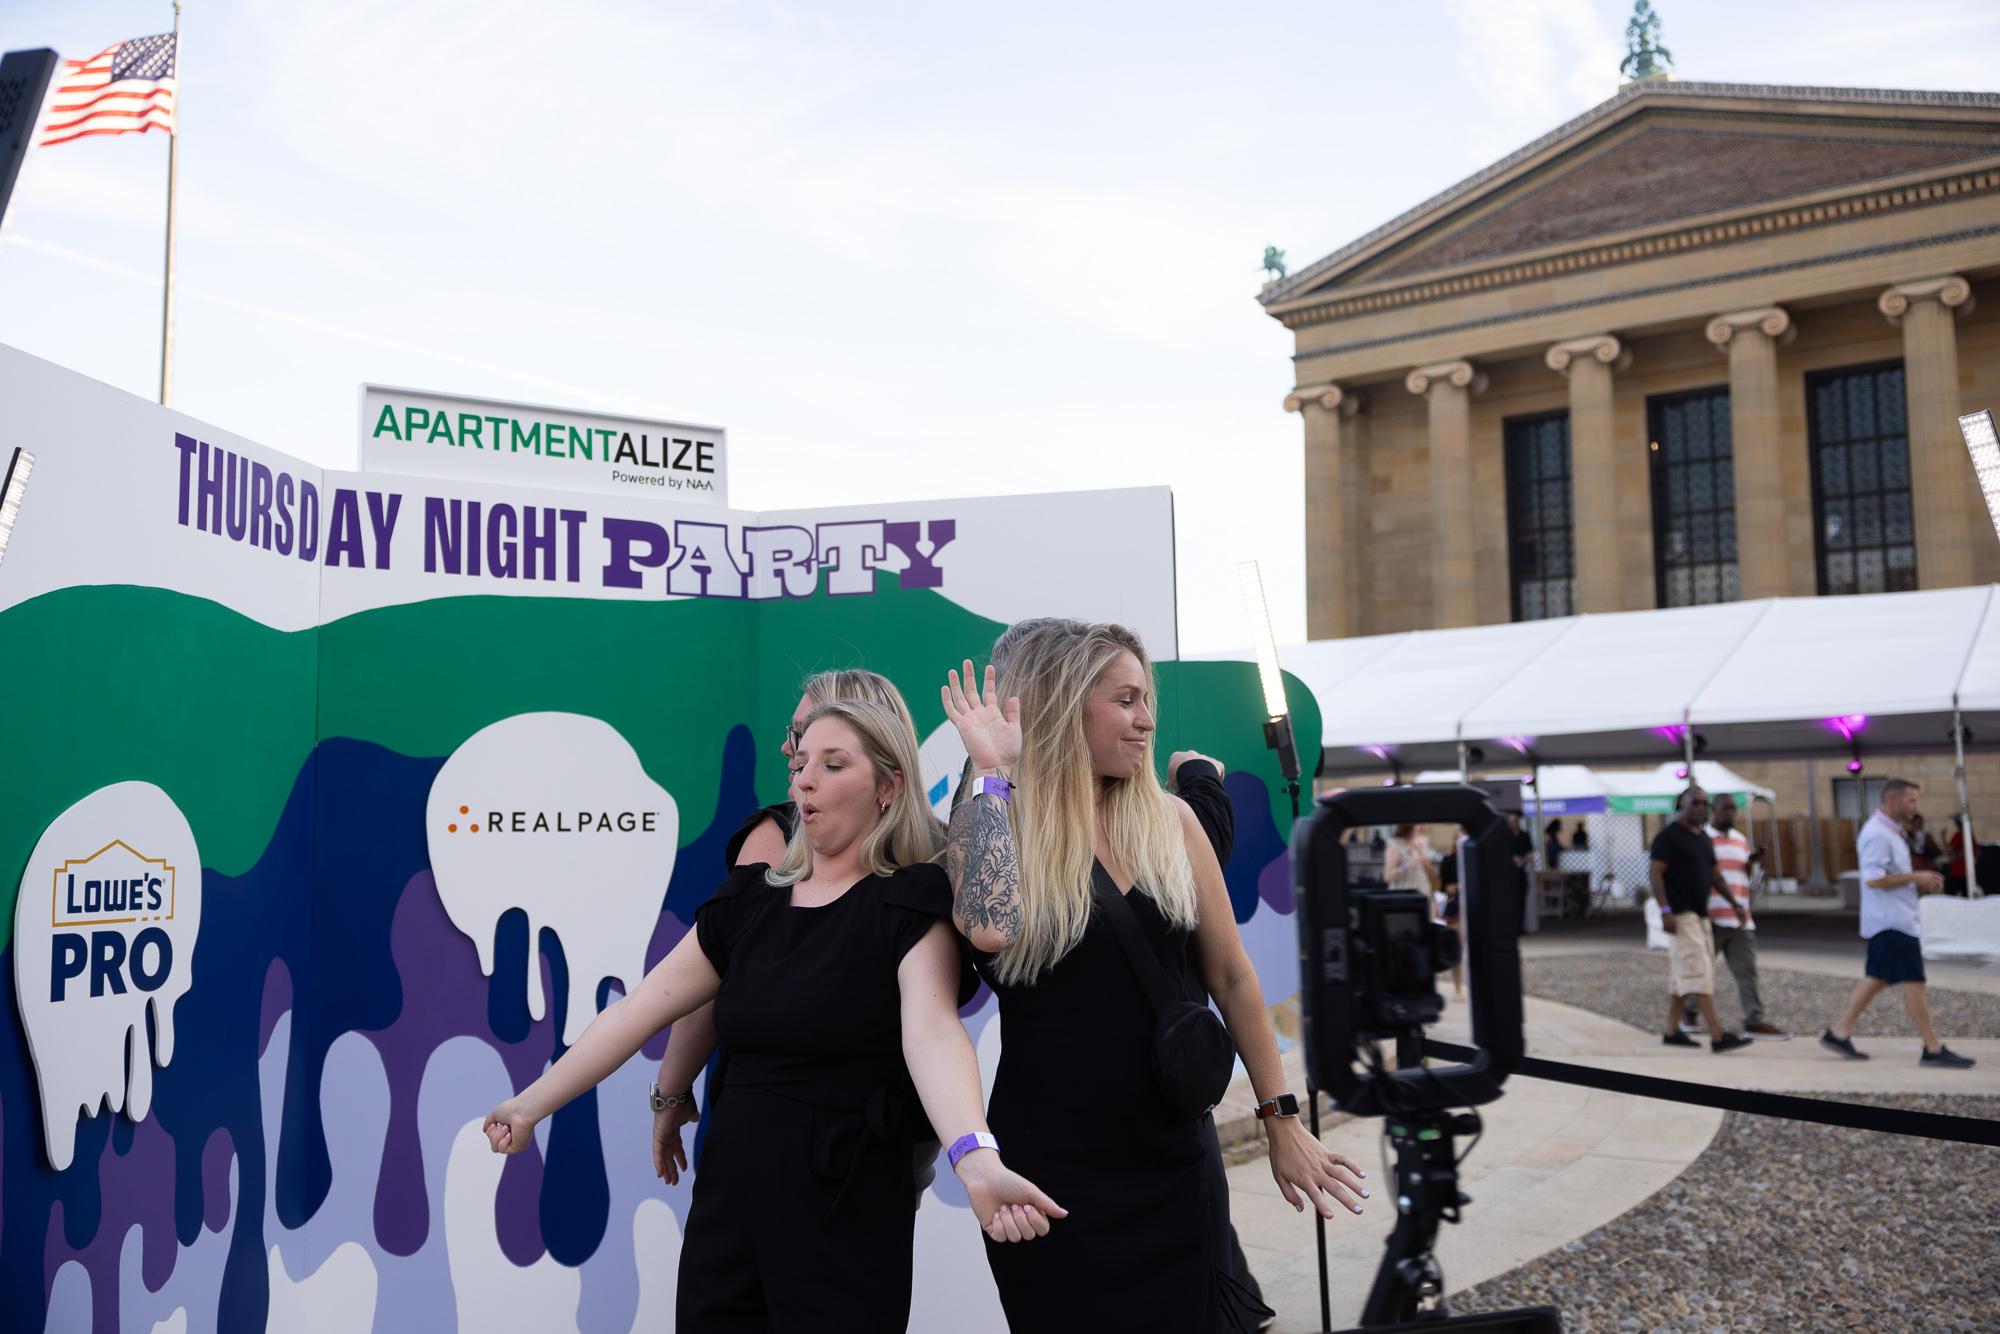 Plenty to see and do at NAA’s Thursday Night Party at the Philadelphia Museum of Art during Apartmentalize.